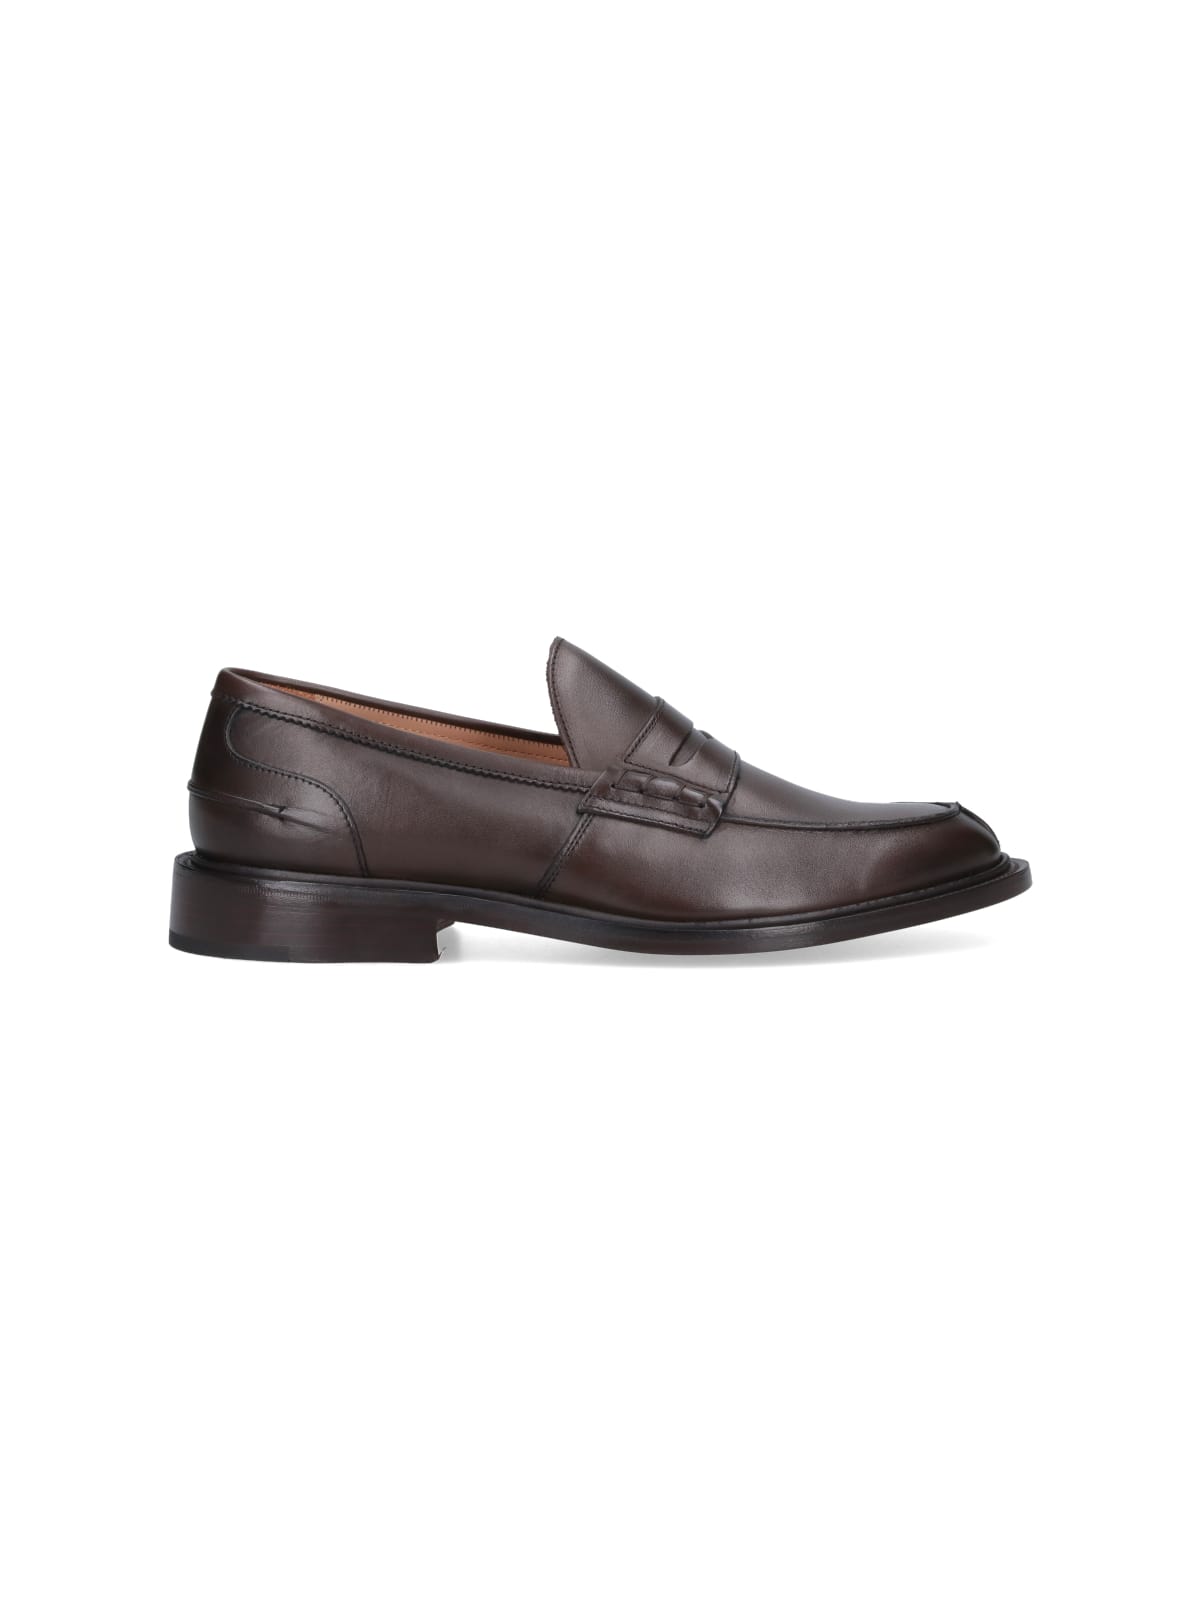 Tricker's Loafers In Brown